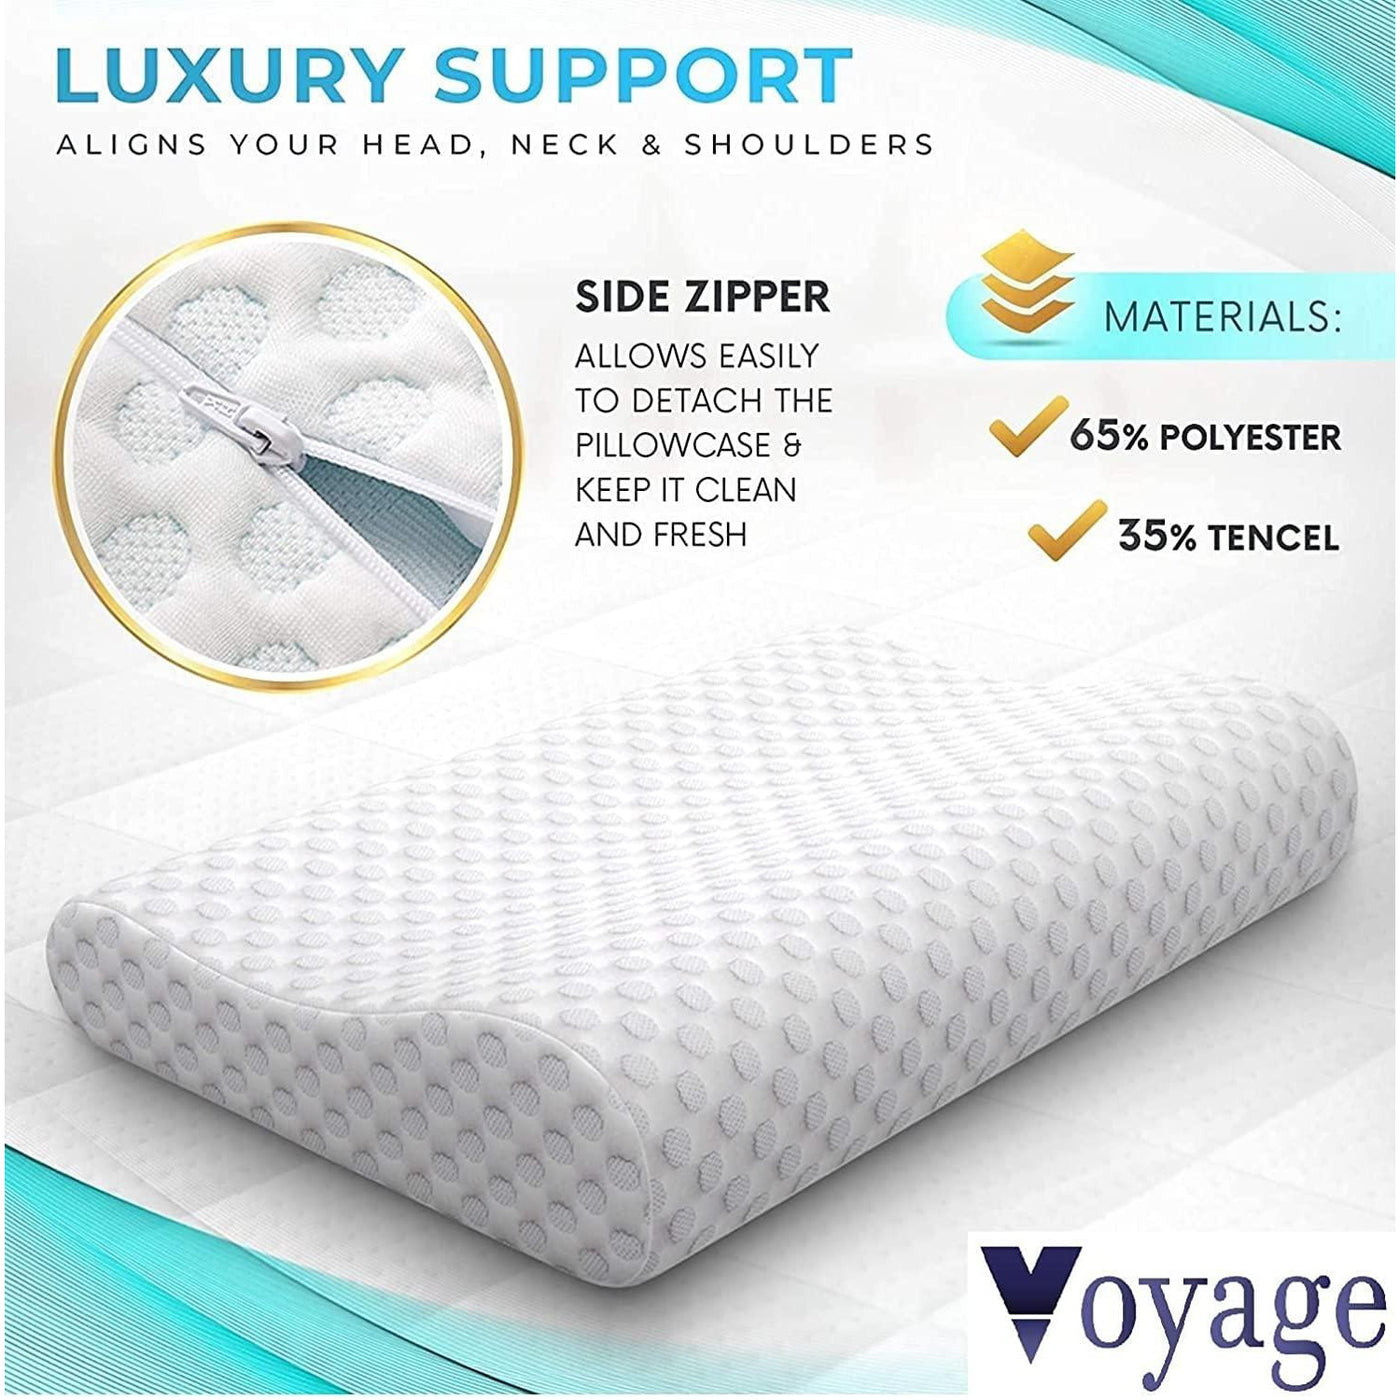 Voyage Memory Foam Supportive Bed Pillow